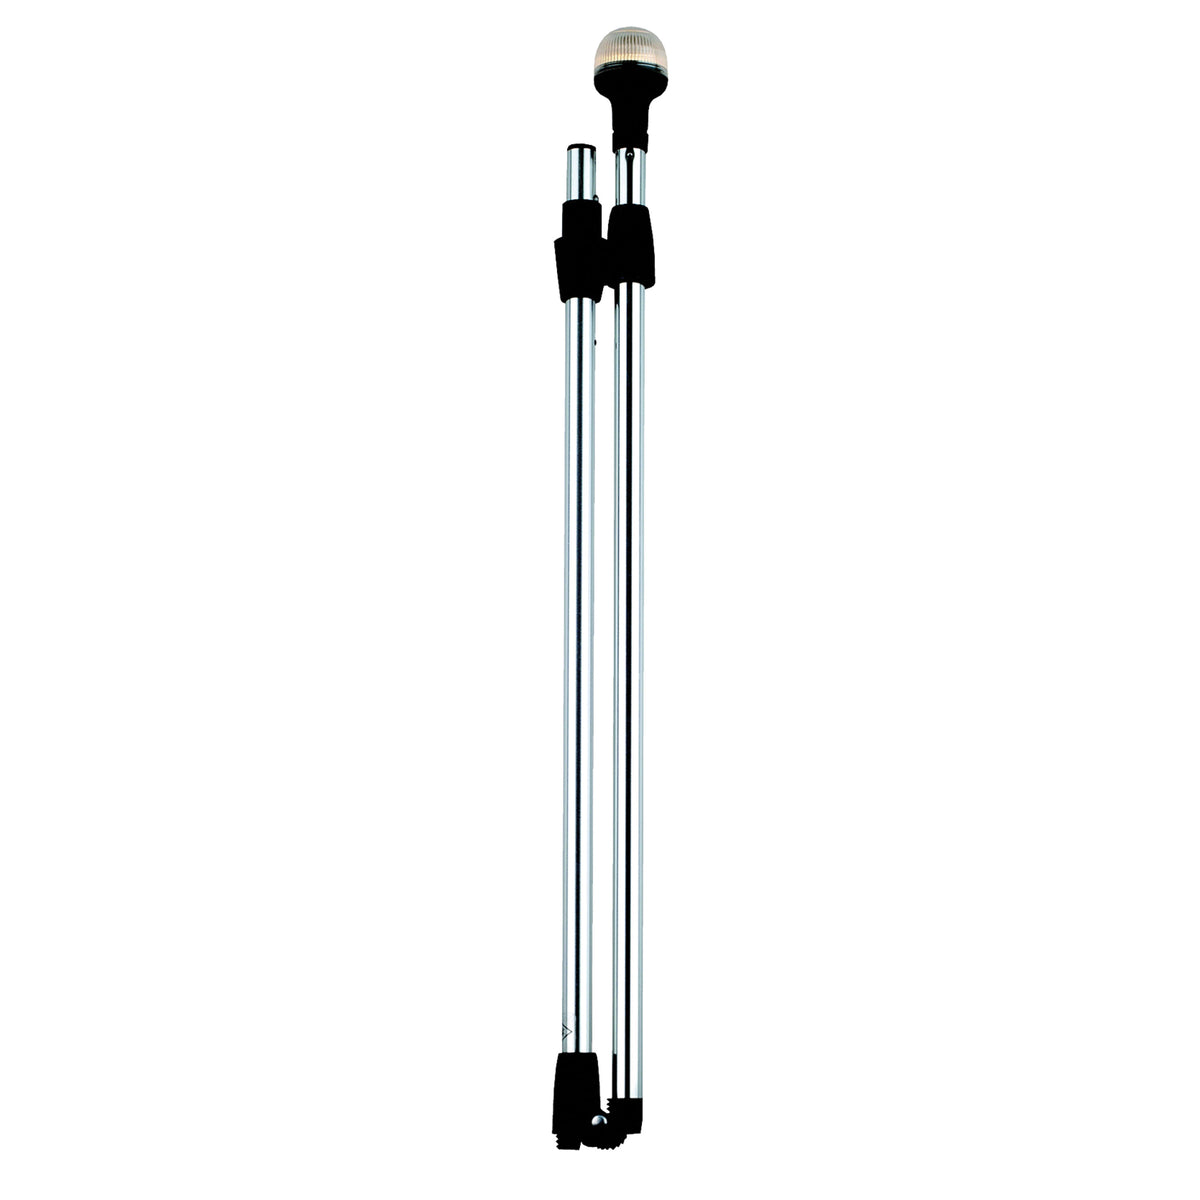 Attwood 5340-54-7 Two-Mile Folding Pole All-Round Light - Packaged